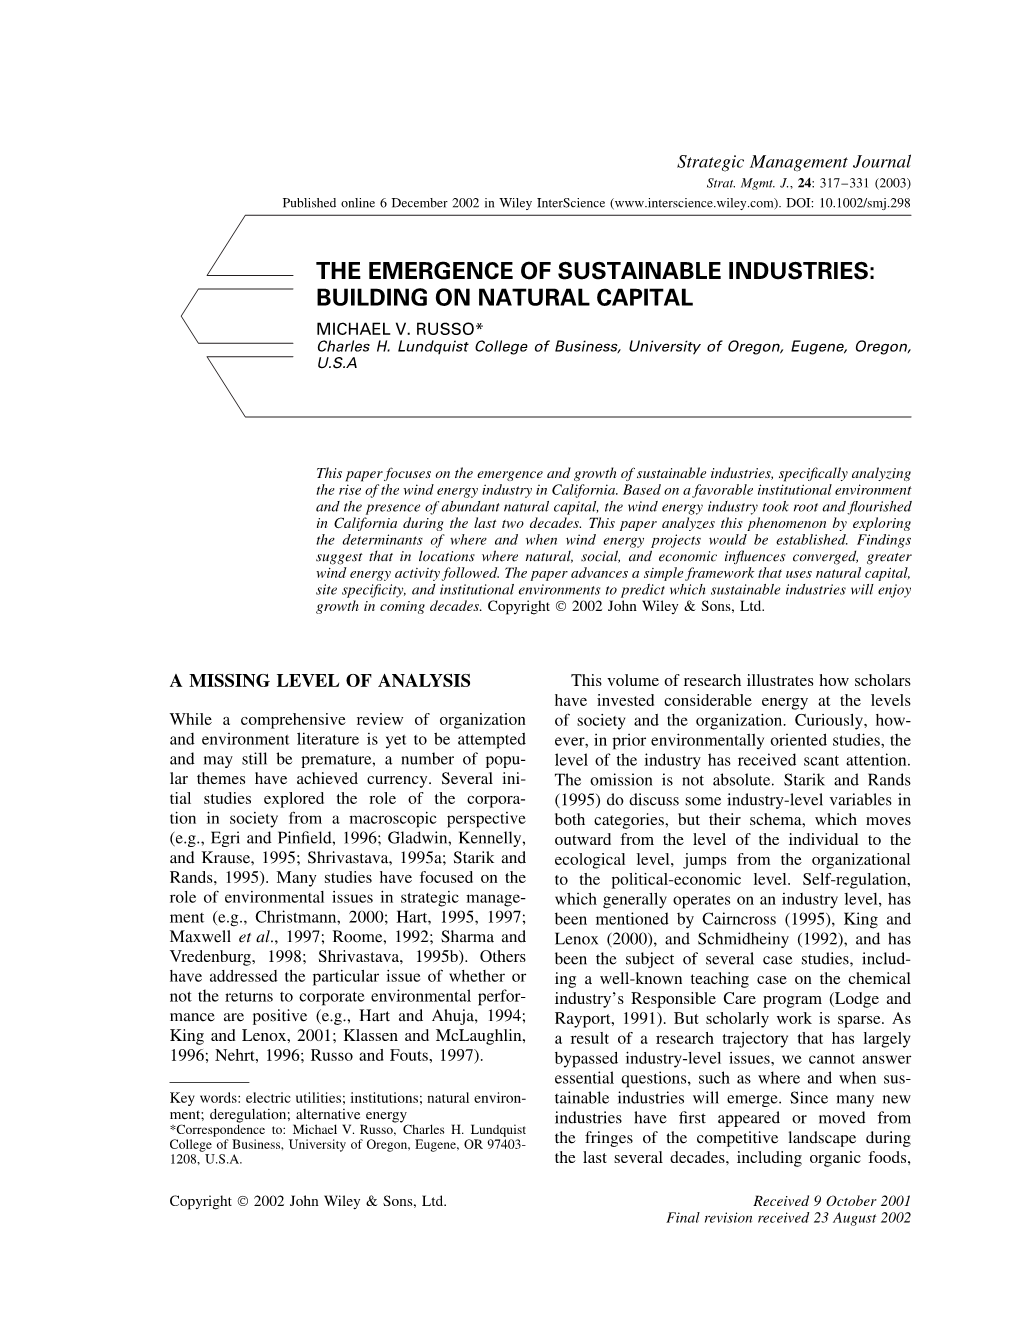 The Emergence of Sustainable Industries: Building on Natural Capital Michael V